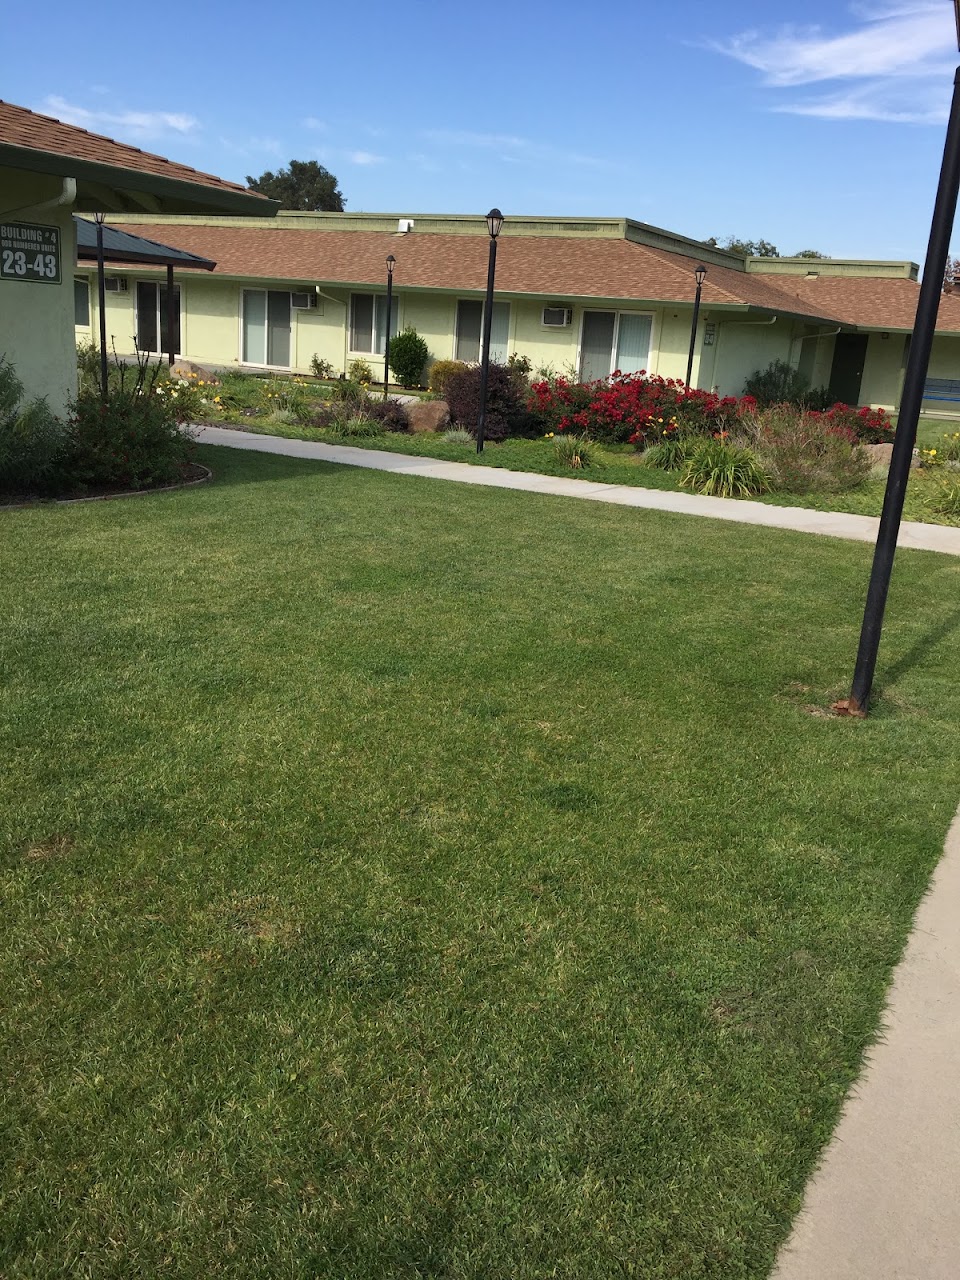 Photo of GARDEN APTS at 40 N LEE AVE OAKDALE, CA 95361